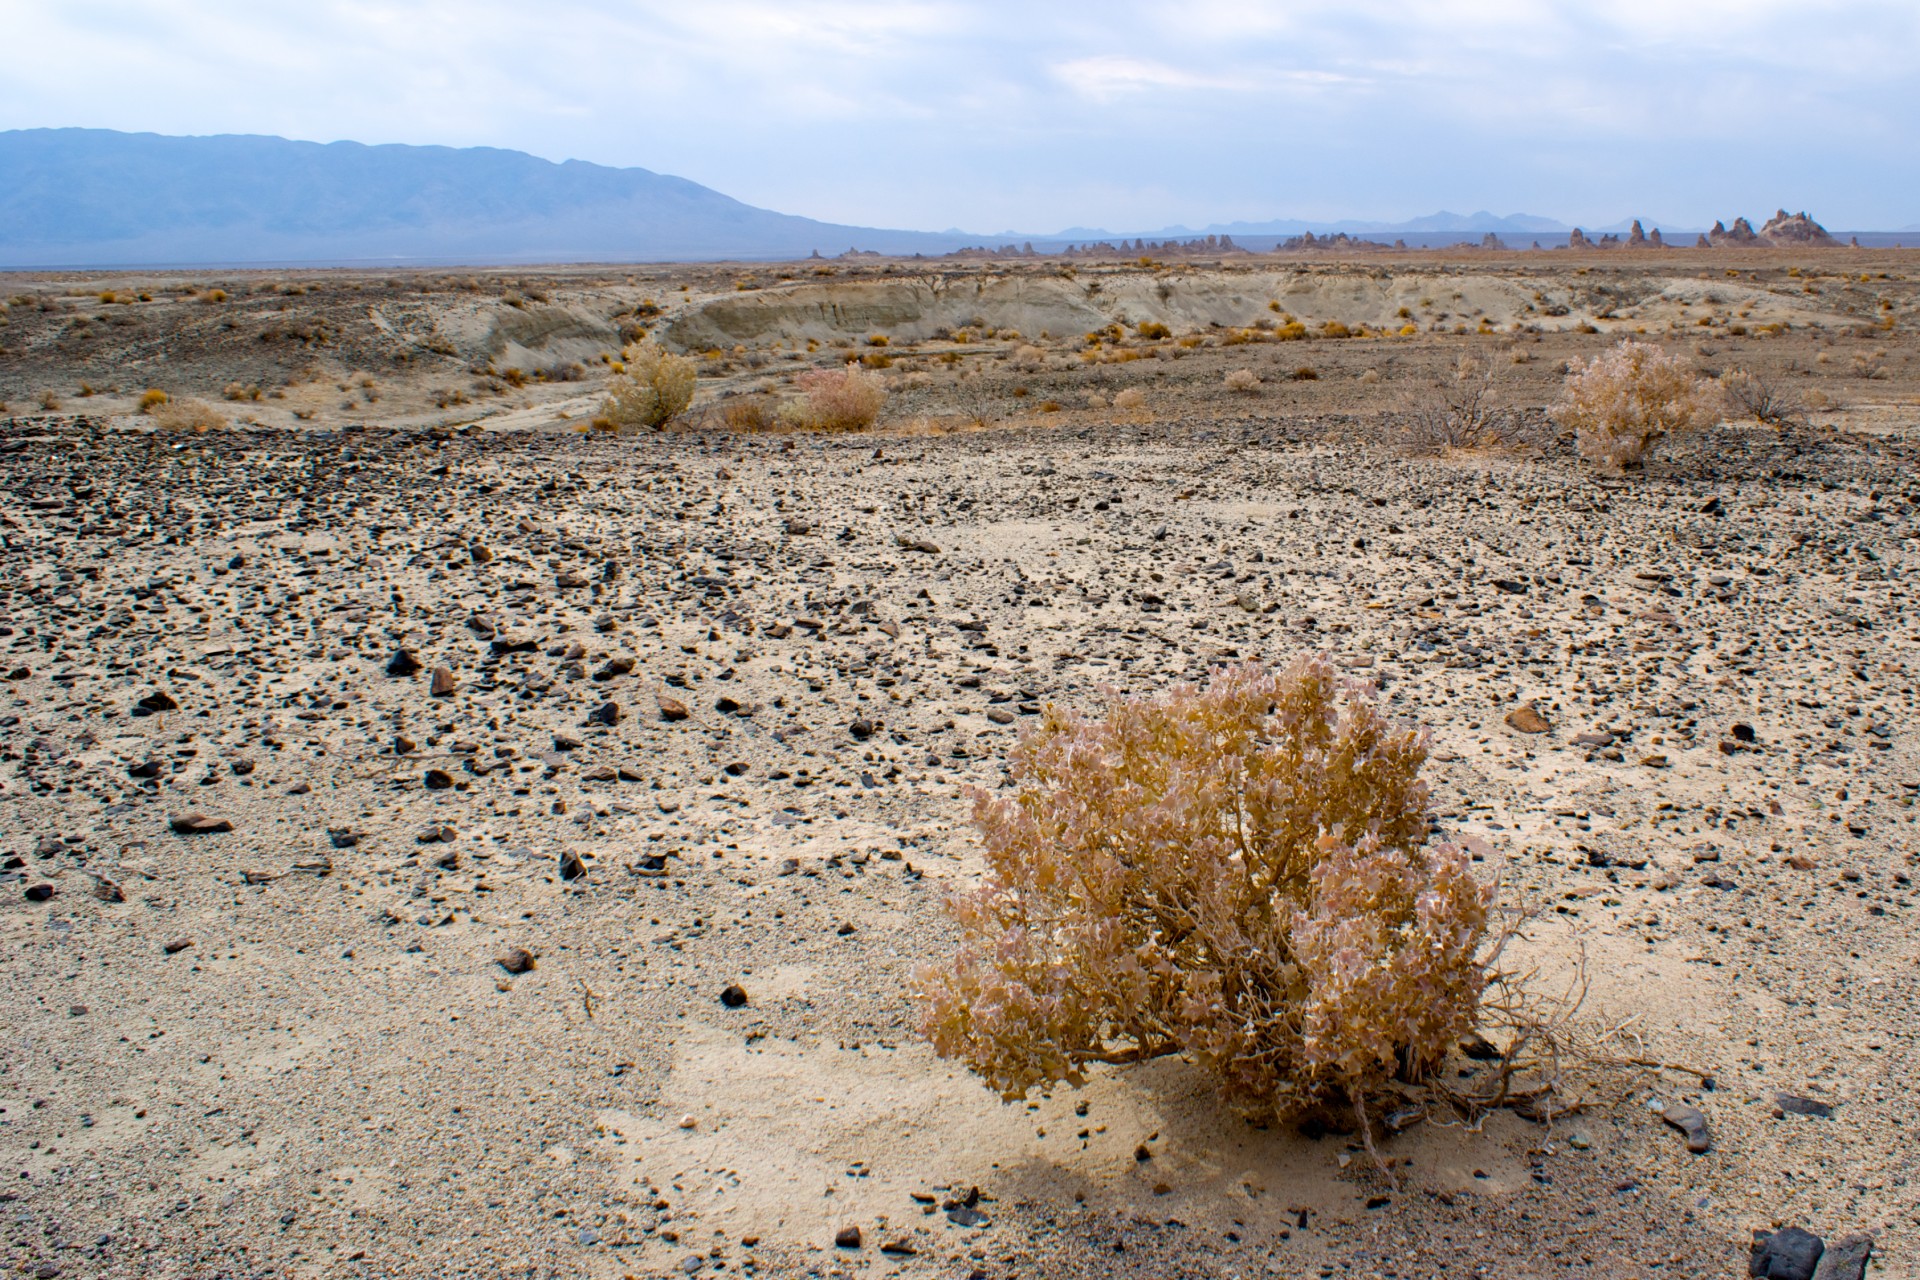 Mojave desert wilderness desolation in the vast emptiness of southern California.